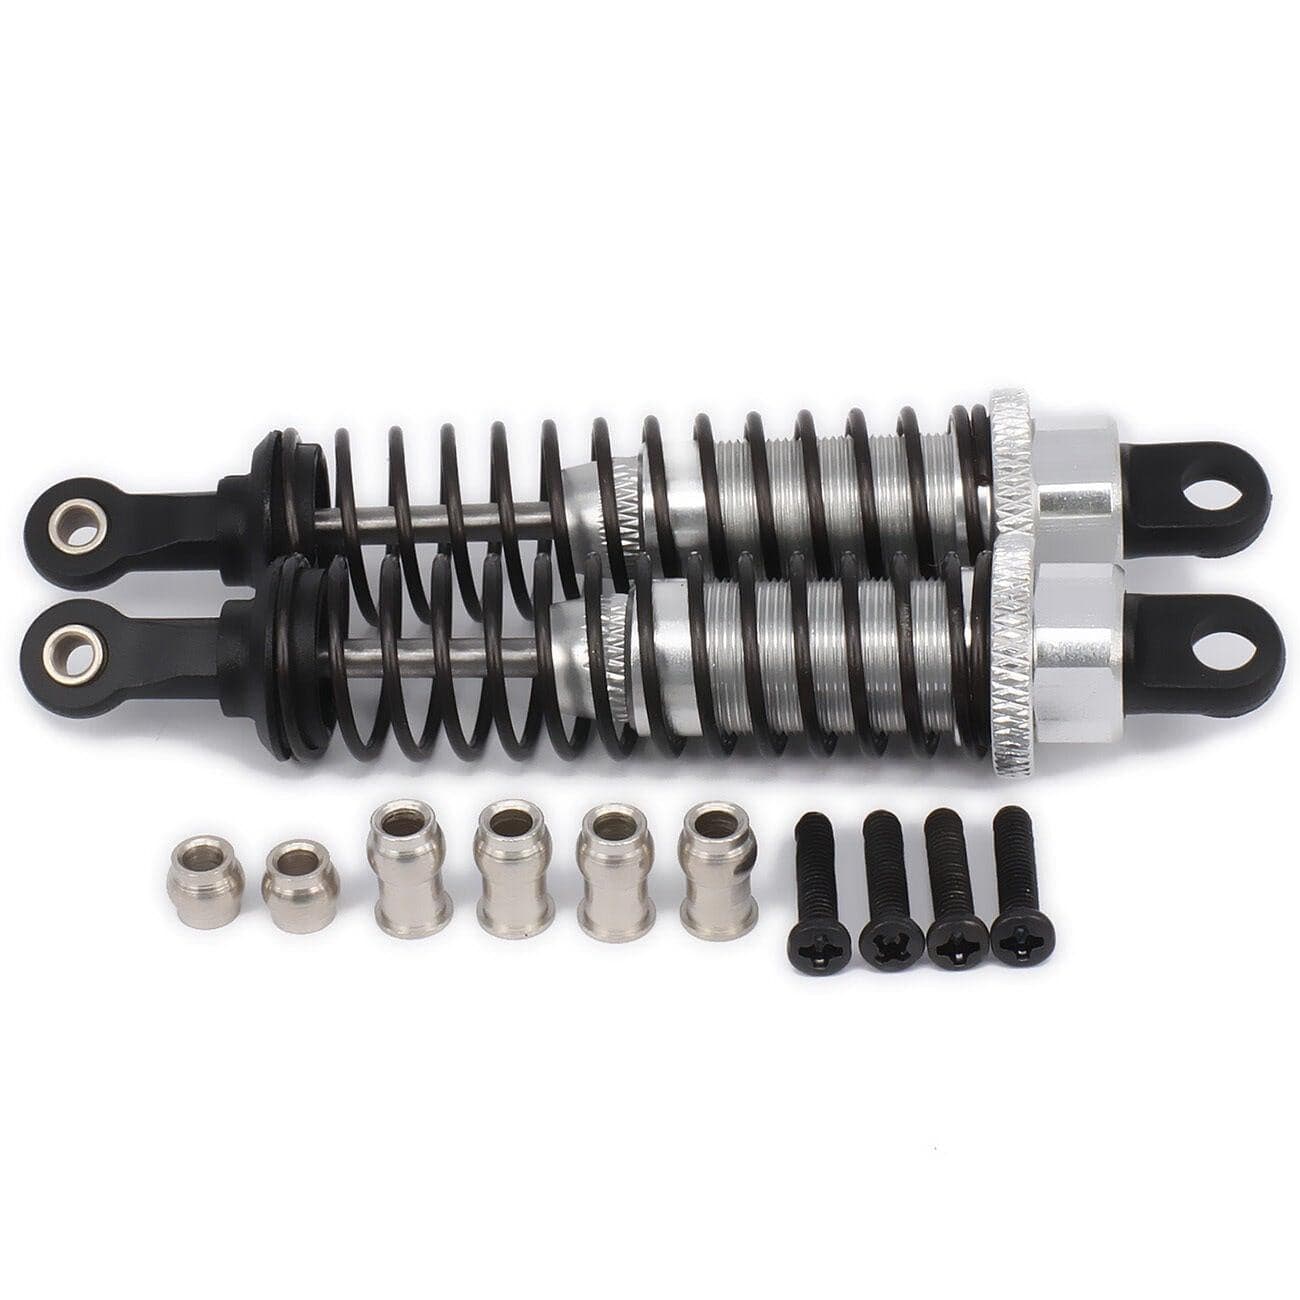 RCAWD RC CAR UPGRADE PARTS Silver RCAWD 80mm Shock Absorber Damper Oil Adjustable Style for 1/16 Rc Car 2pcs